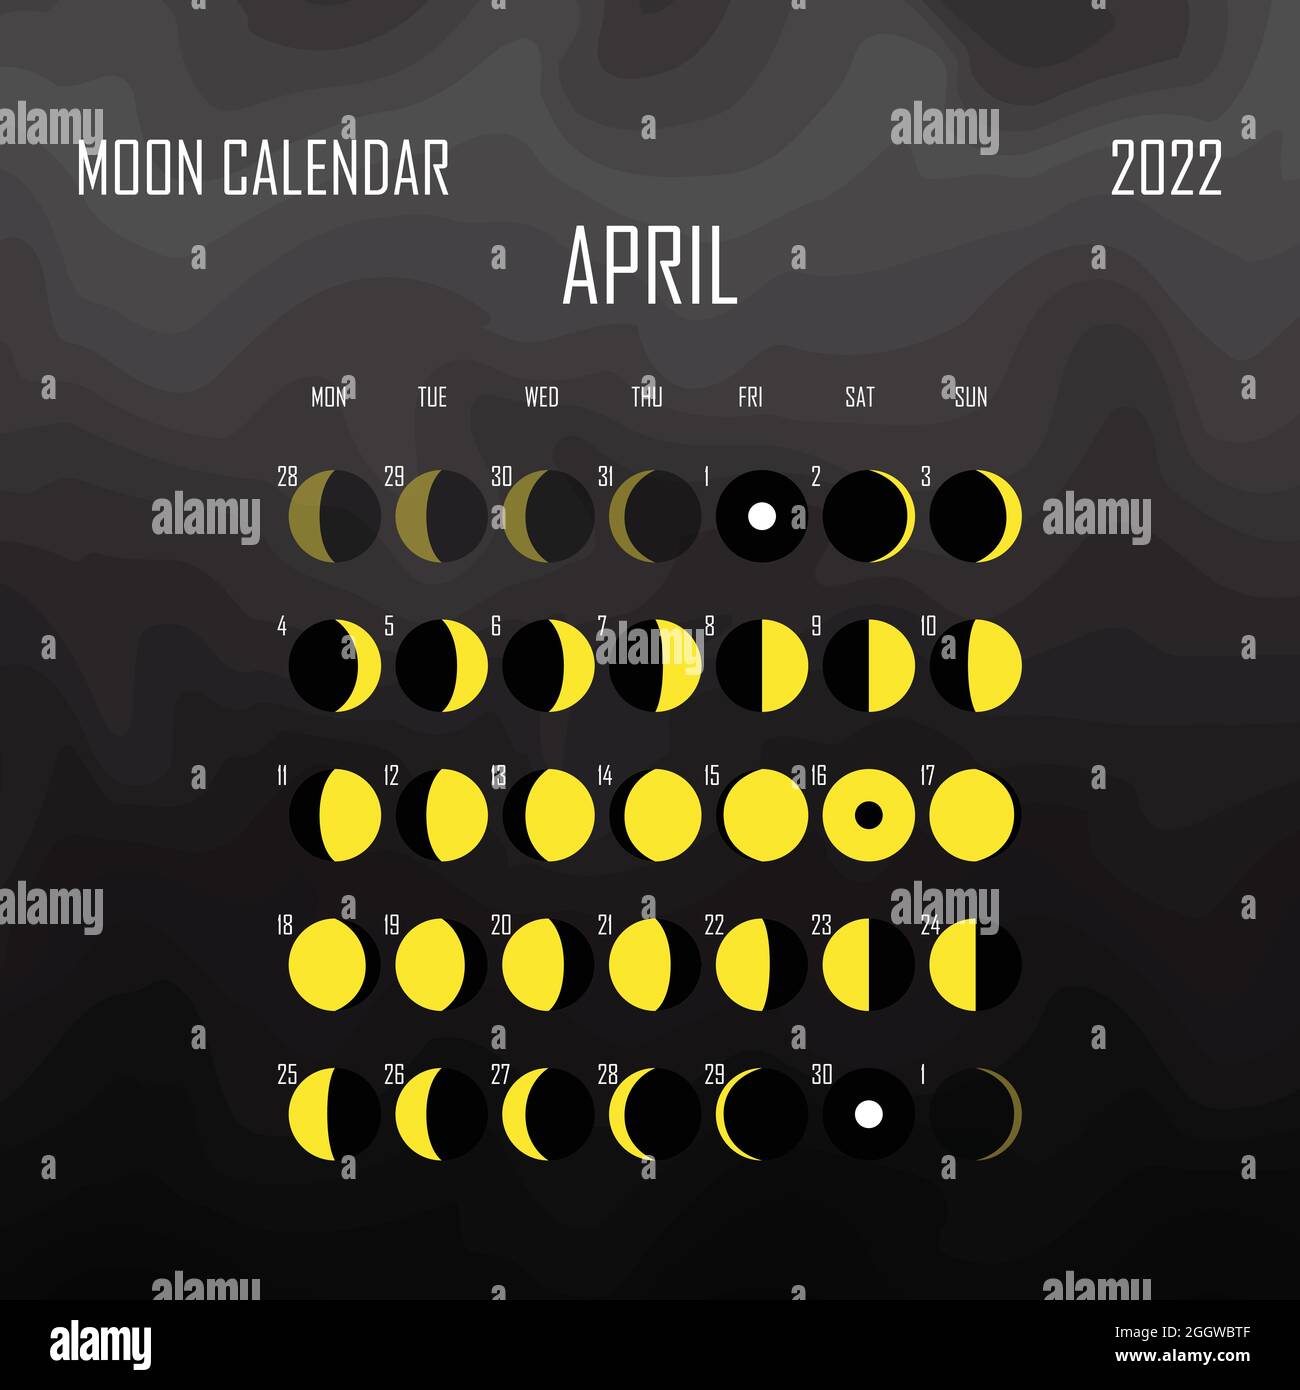 Lunar Calendar April 2022 April 2022 Moon Calendar. Astrological Calendar Design. Planner. Place For  Stickers. Month Cycle Planner Mockup. Isolated Black And White Background  Stock Vector Image & Art - Alamy